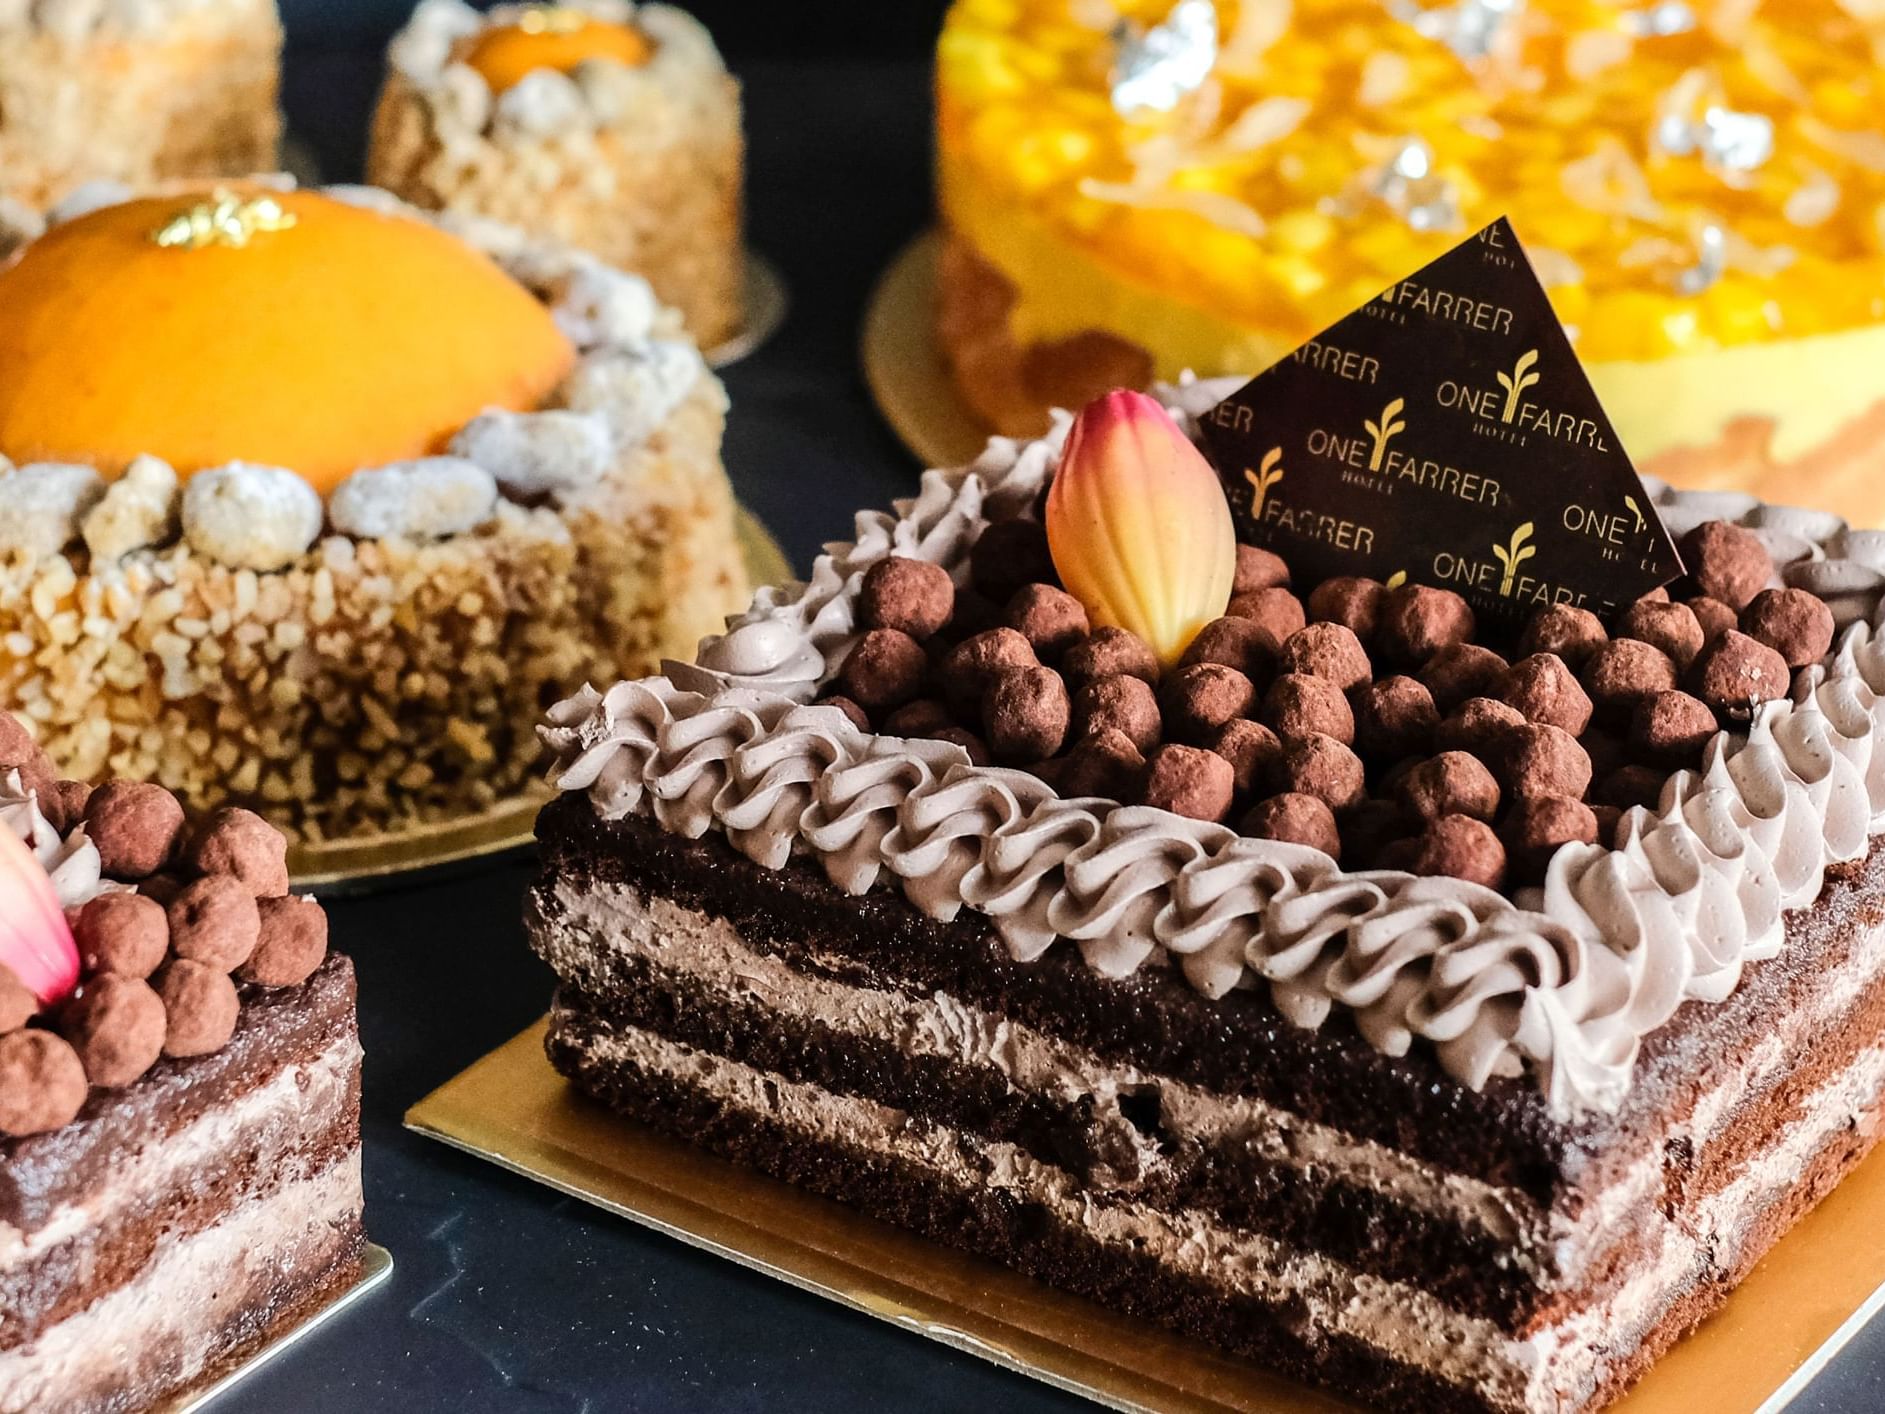 Cakes from One Farrer Confectionery at One Farrer Hotel